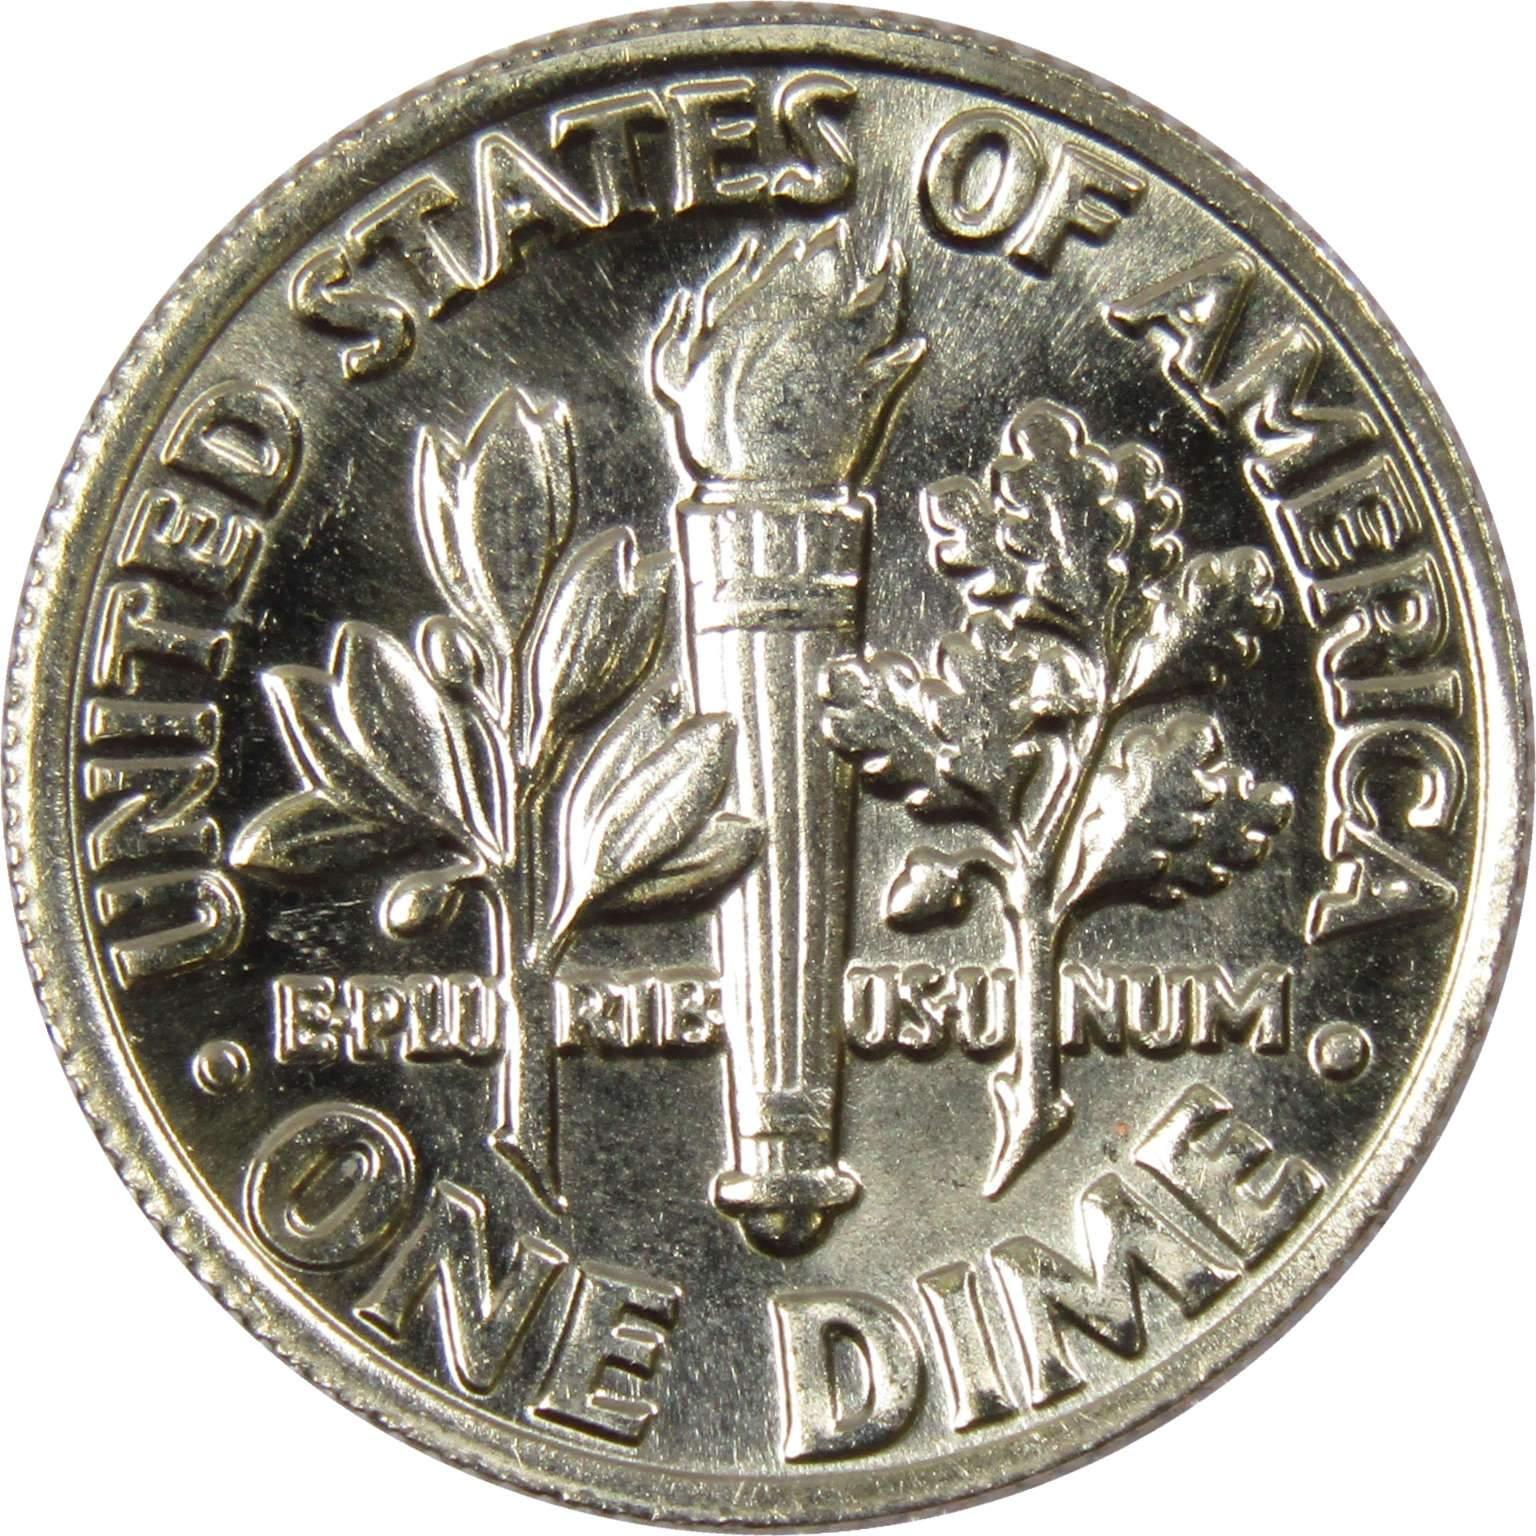 1985 D Roosevelt Dime BU Uncirculated Mint State 10c US Coin Collectible